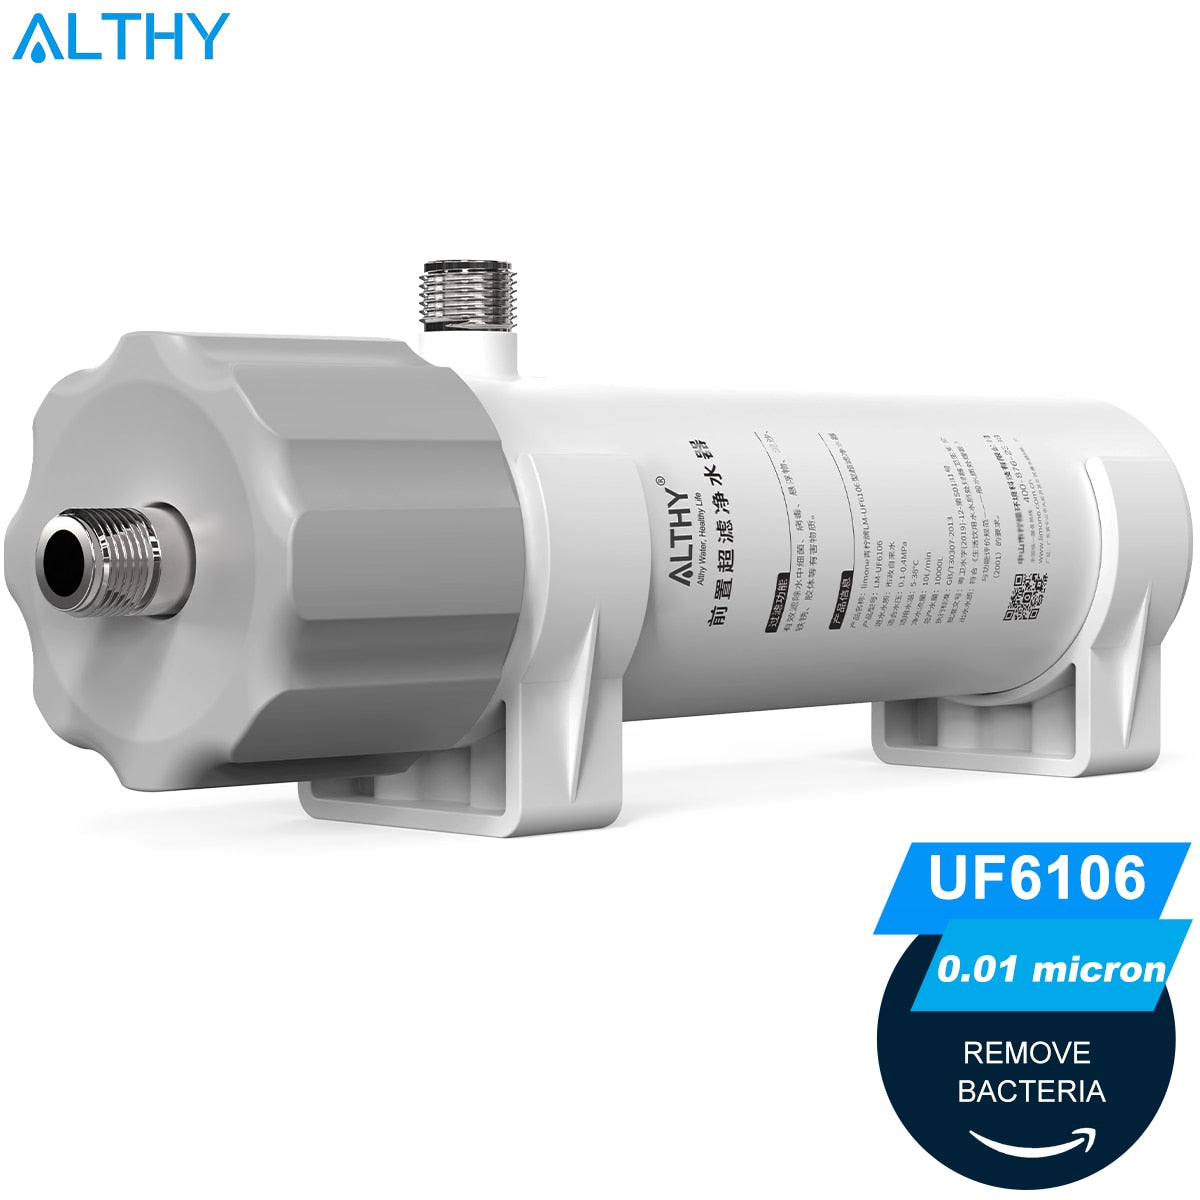 ALTHY 0.01μm PVDF Ultrafiltration Water Filter Purifier System for Bacterial Reduction, Washable UF Membrane,  Drinking Water HostandFilterChina Hardware > Plumbing > Water Dispensing & Filtration 209.76 EZYSELLA SHOP